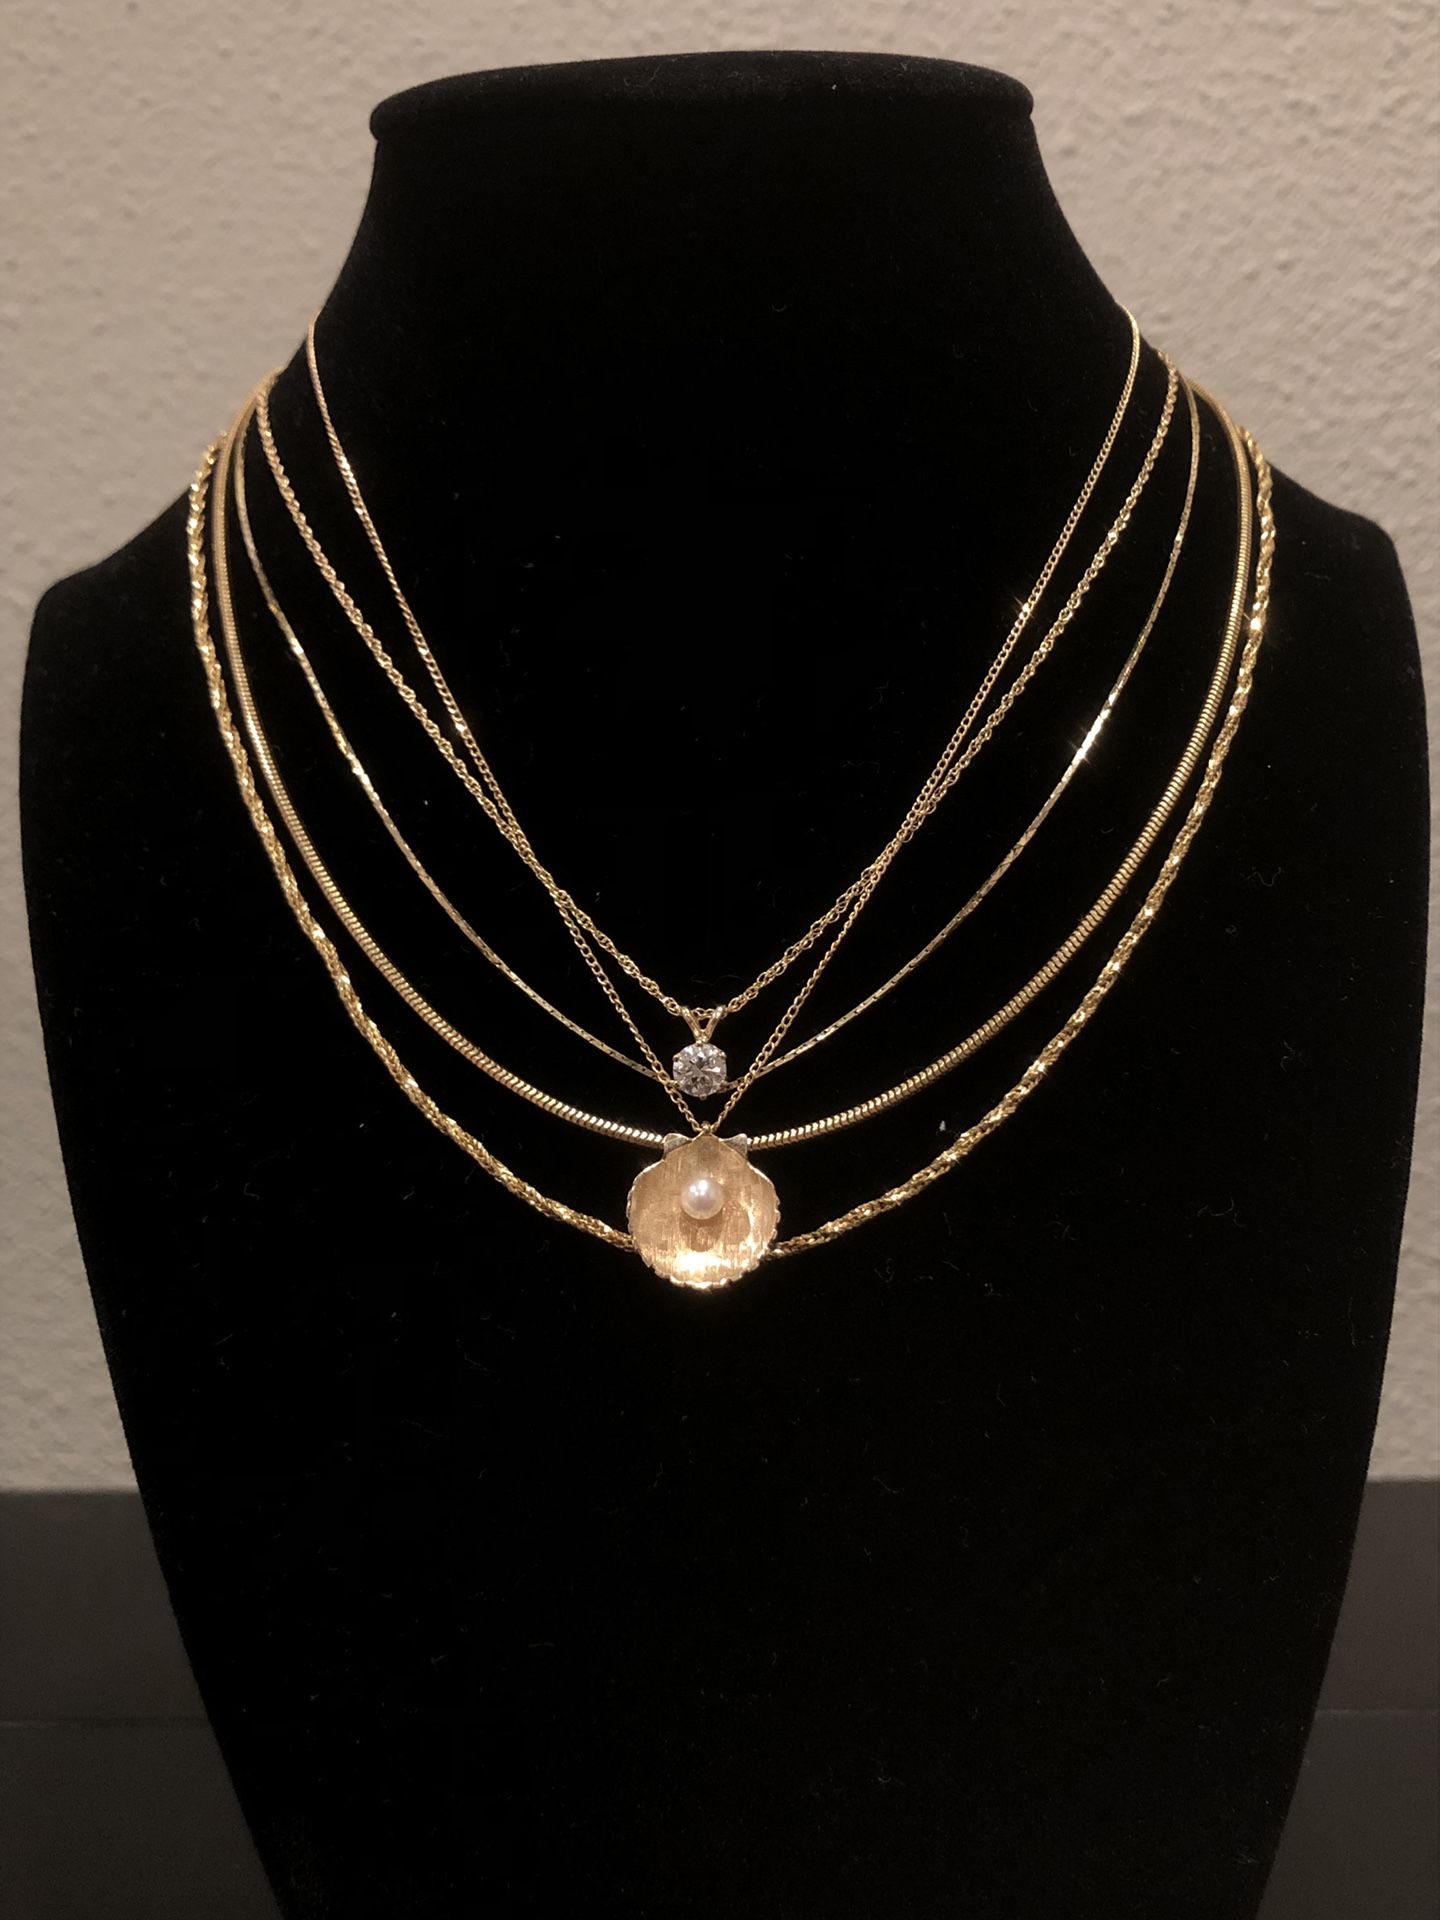 14k Gold Chains starting @ $70. Flat chain, Round chain & Twisted chain.